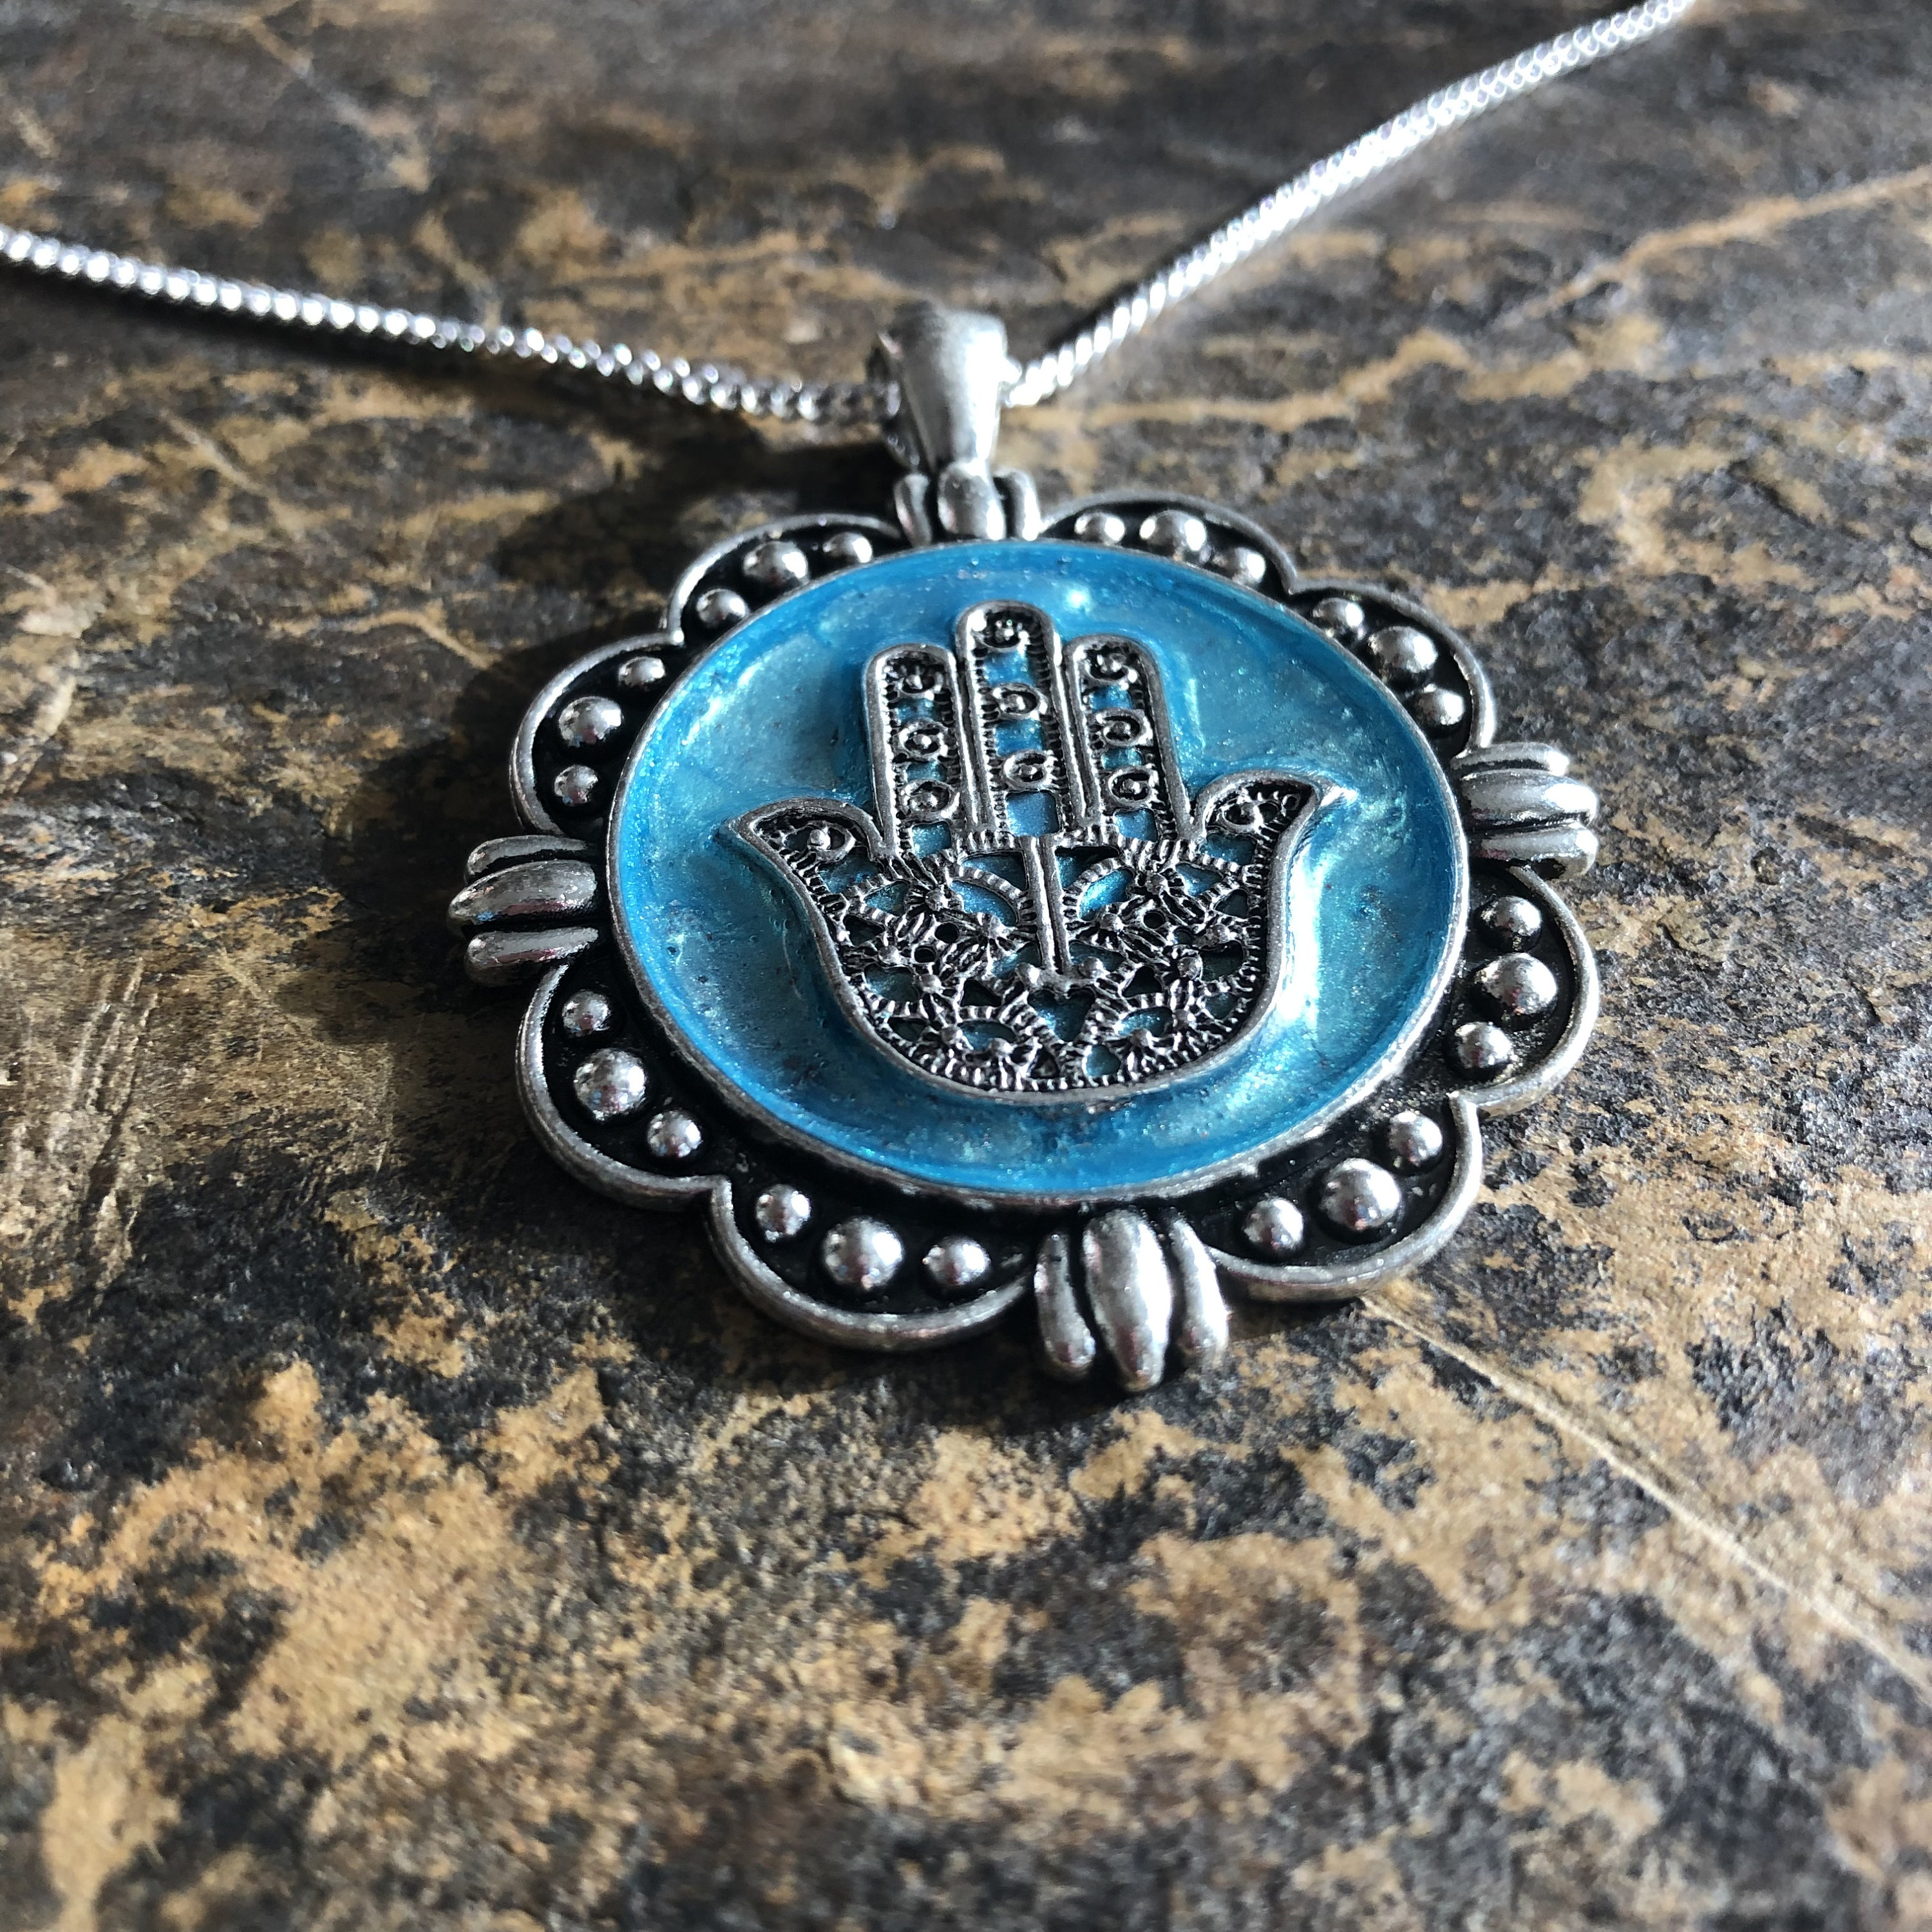 Colorful Hamsa Hand Framed in Blue Pendant on .925 Sterling Silver ...